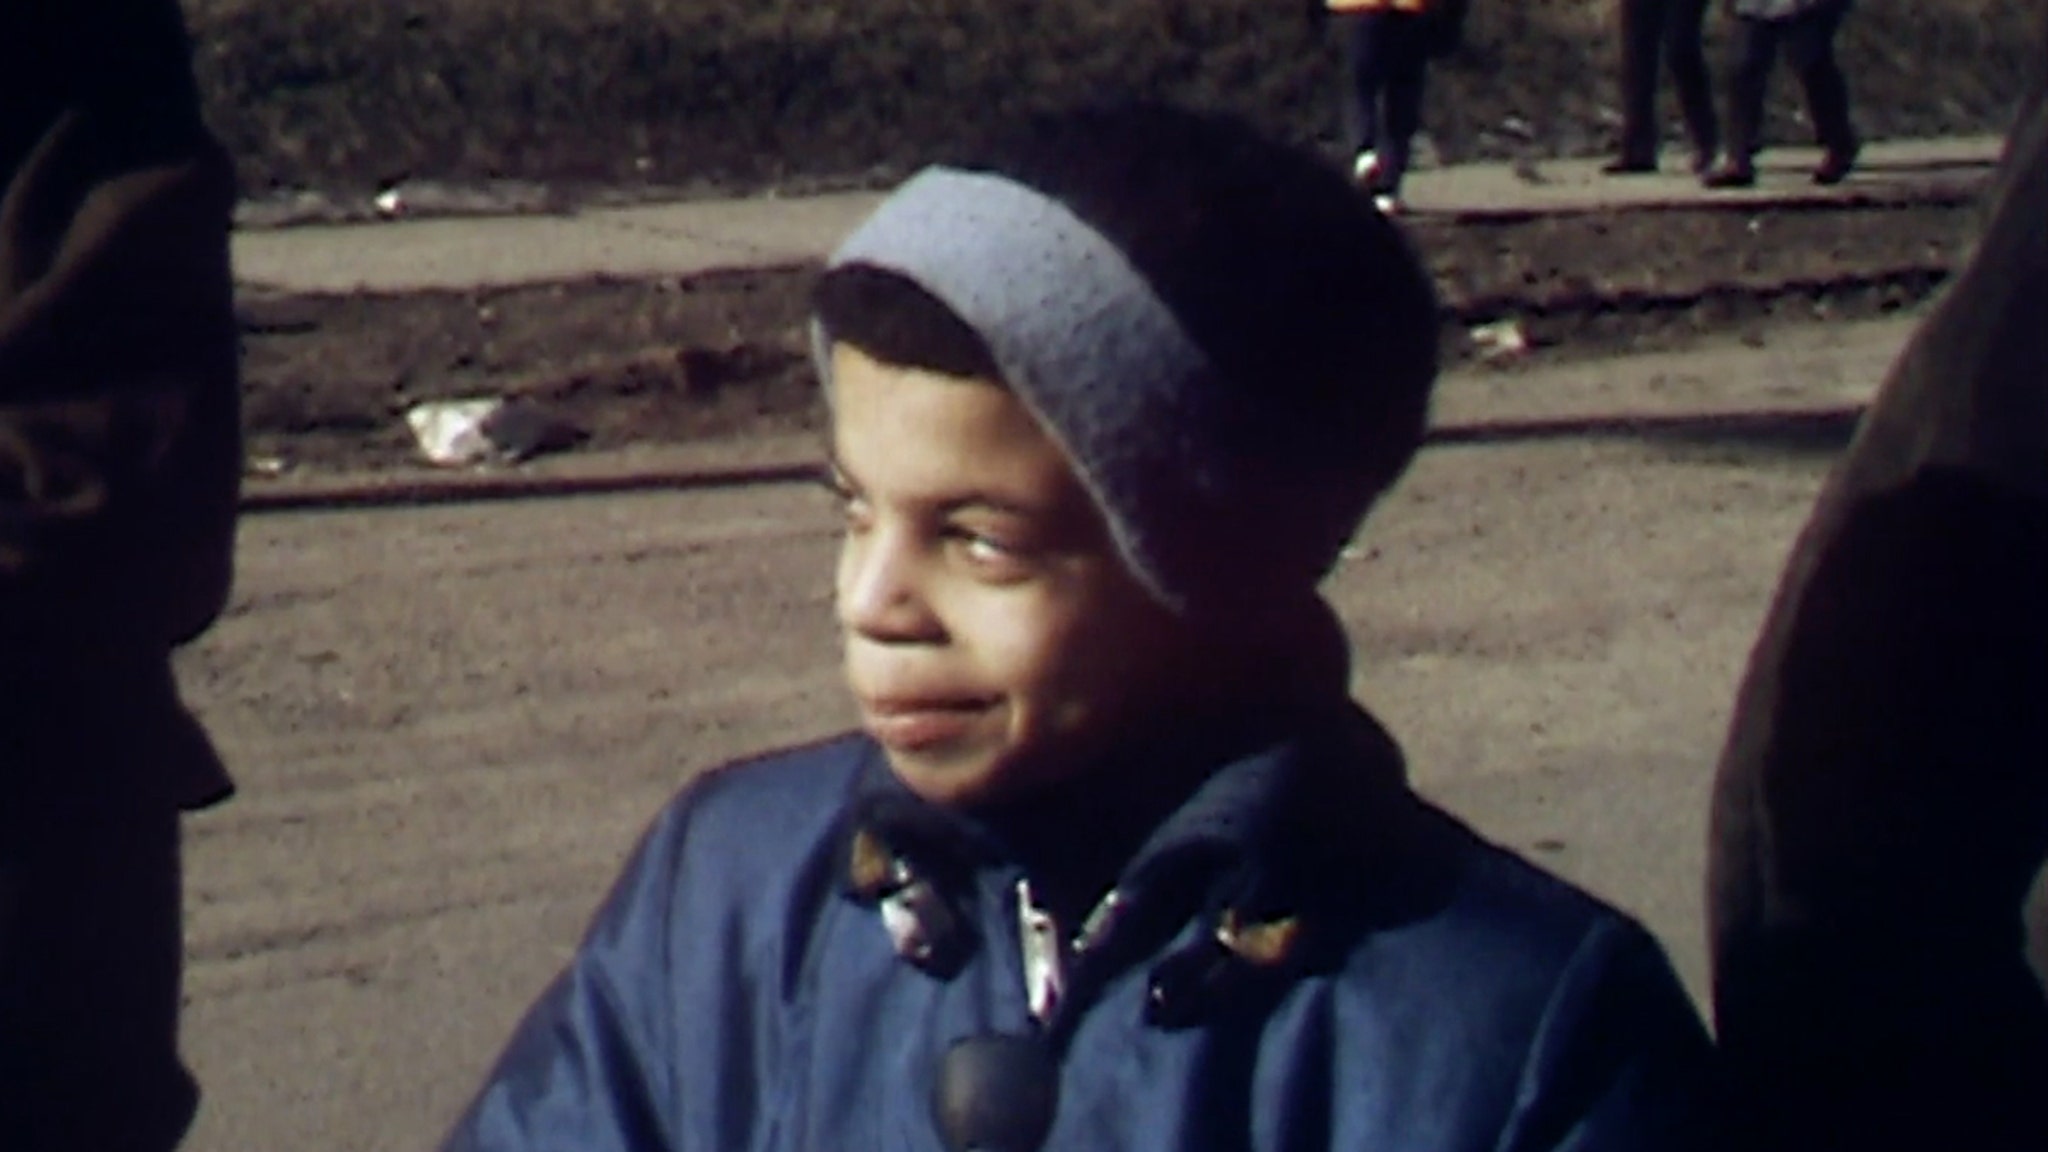 Prince at 11, Rare Childhood Footage Discovered in Minnesota News Archives